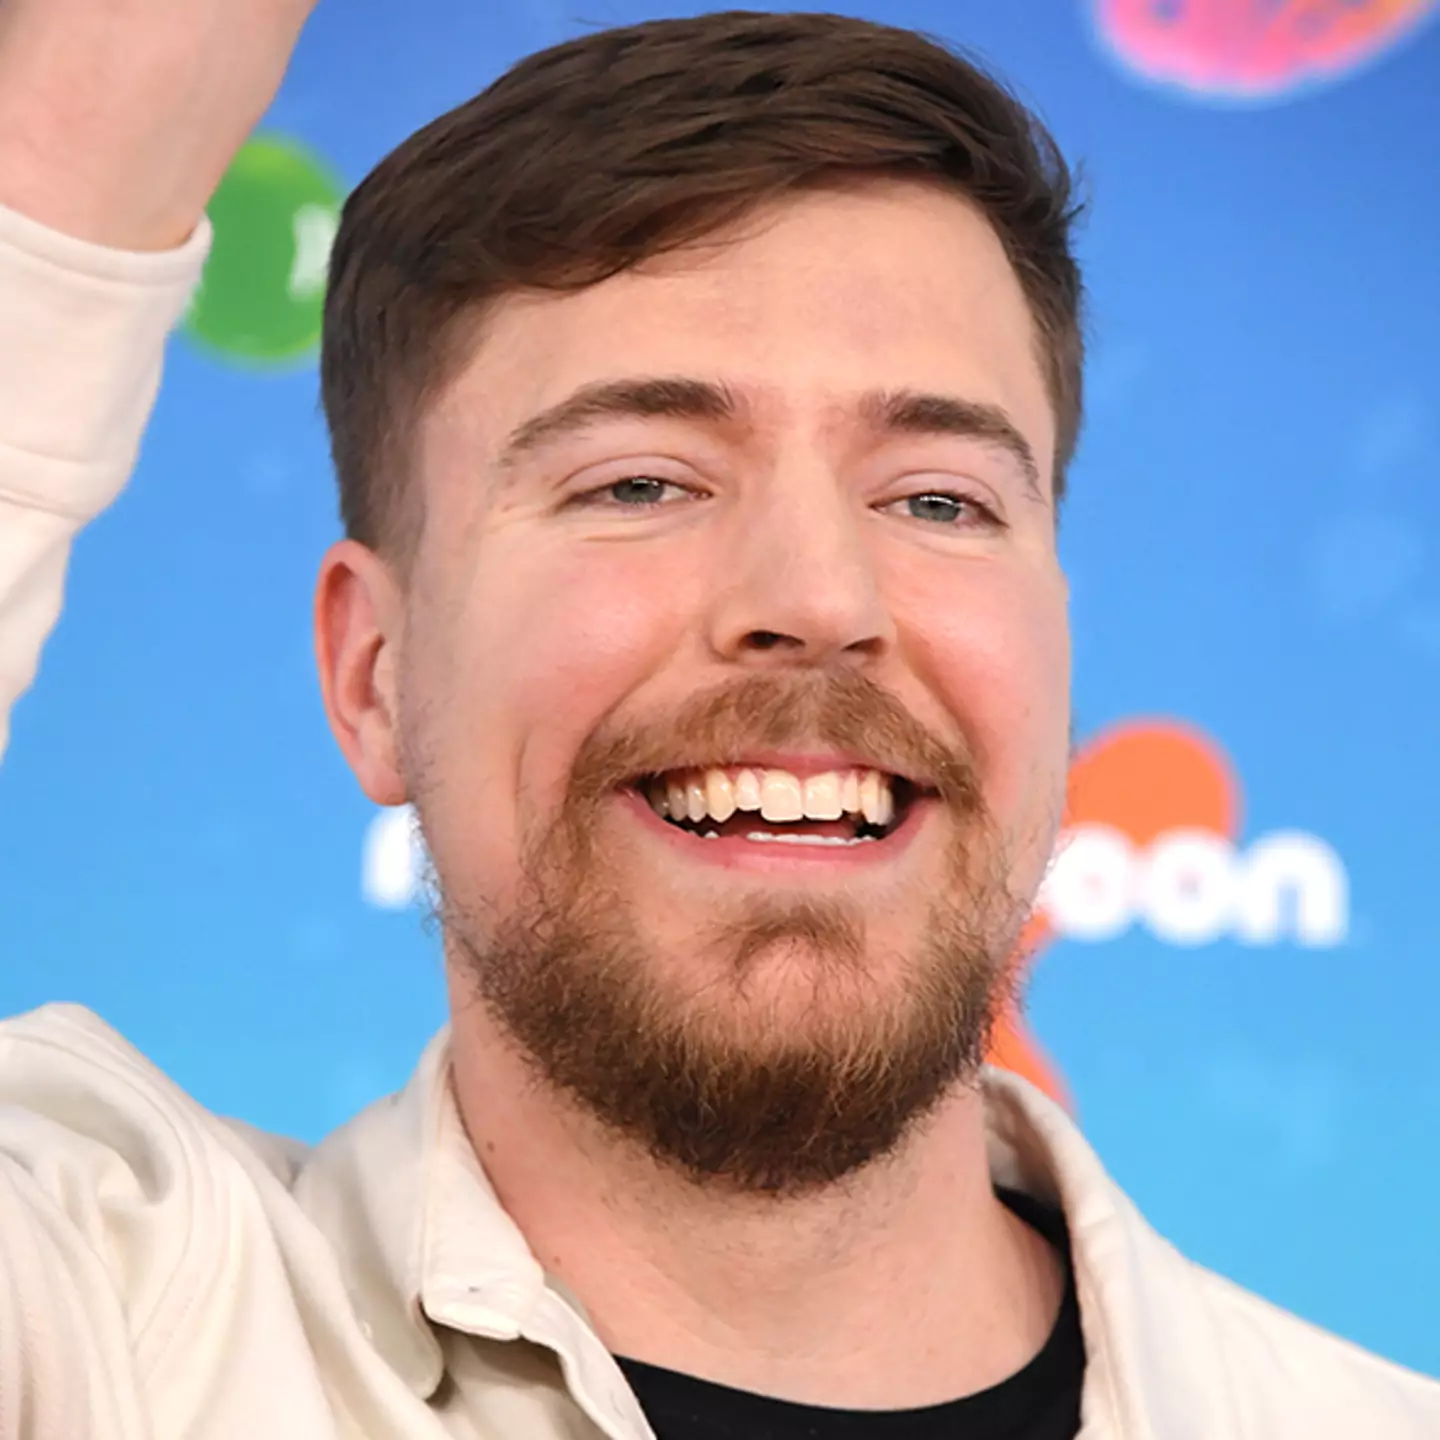 MrBeast and Prime Video announce ‘largest game show in history’